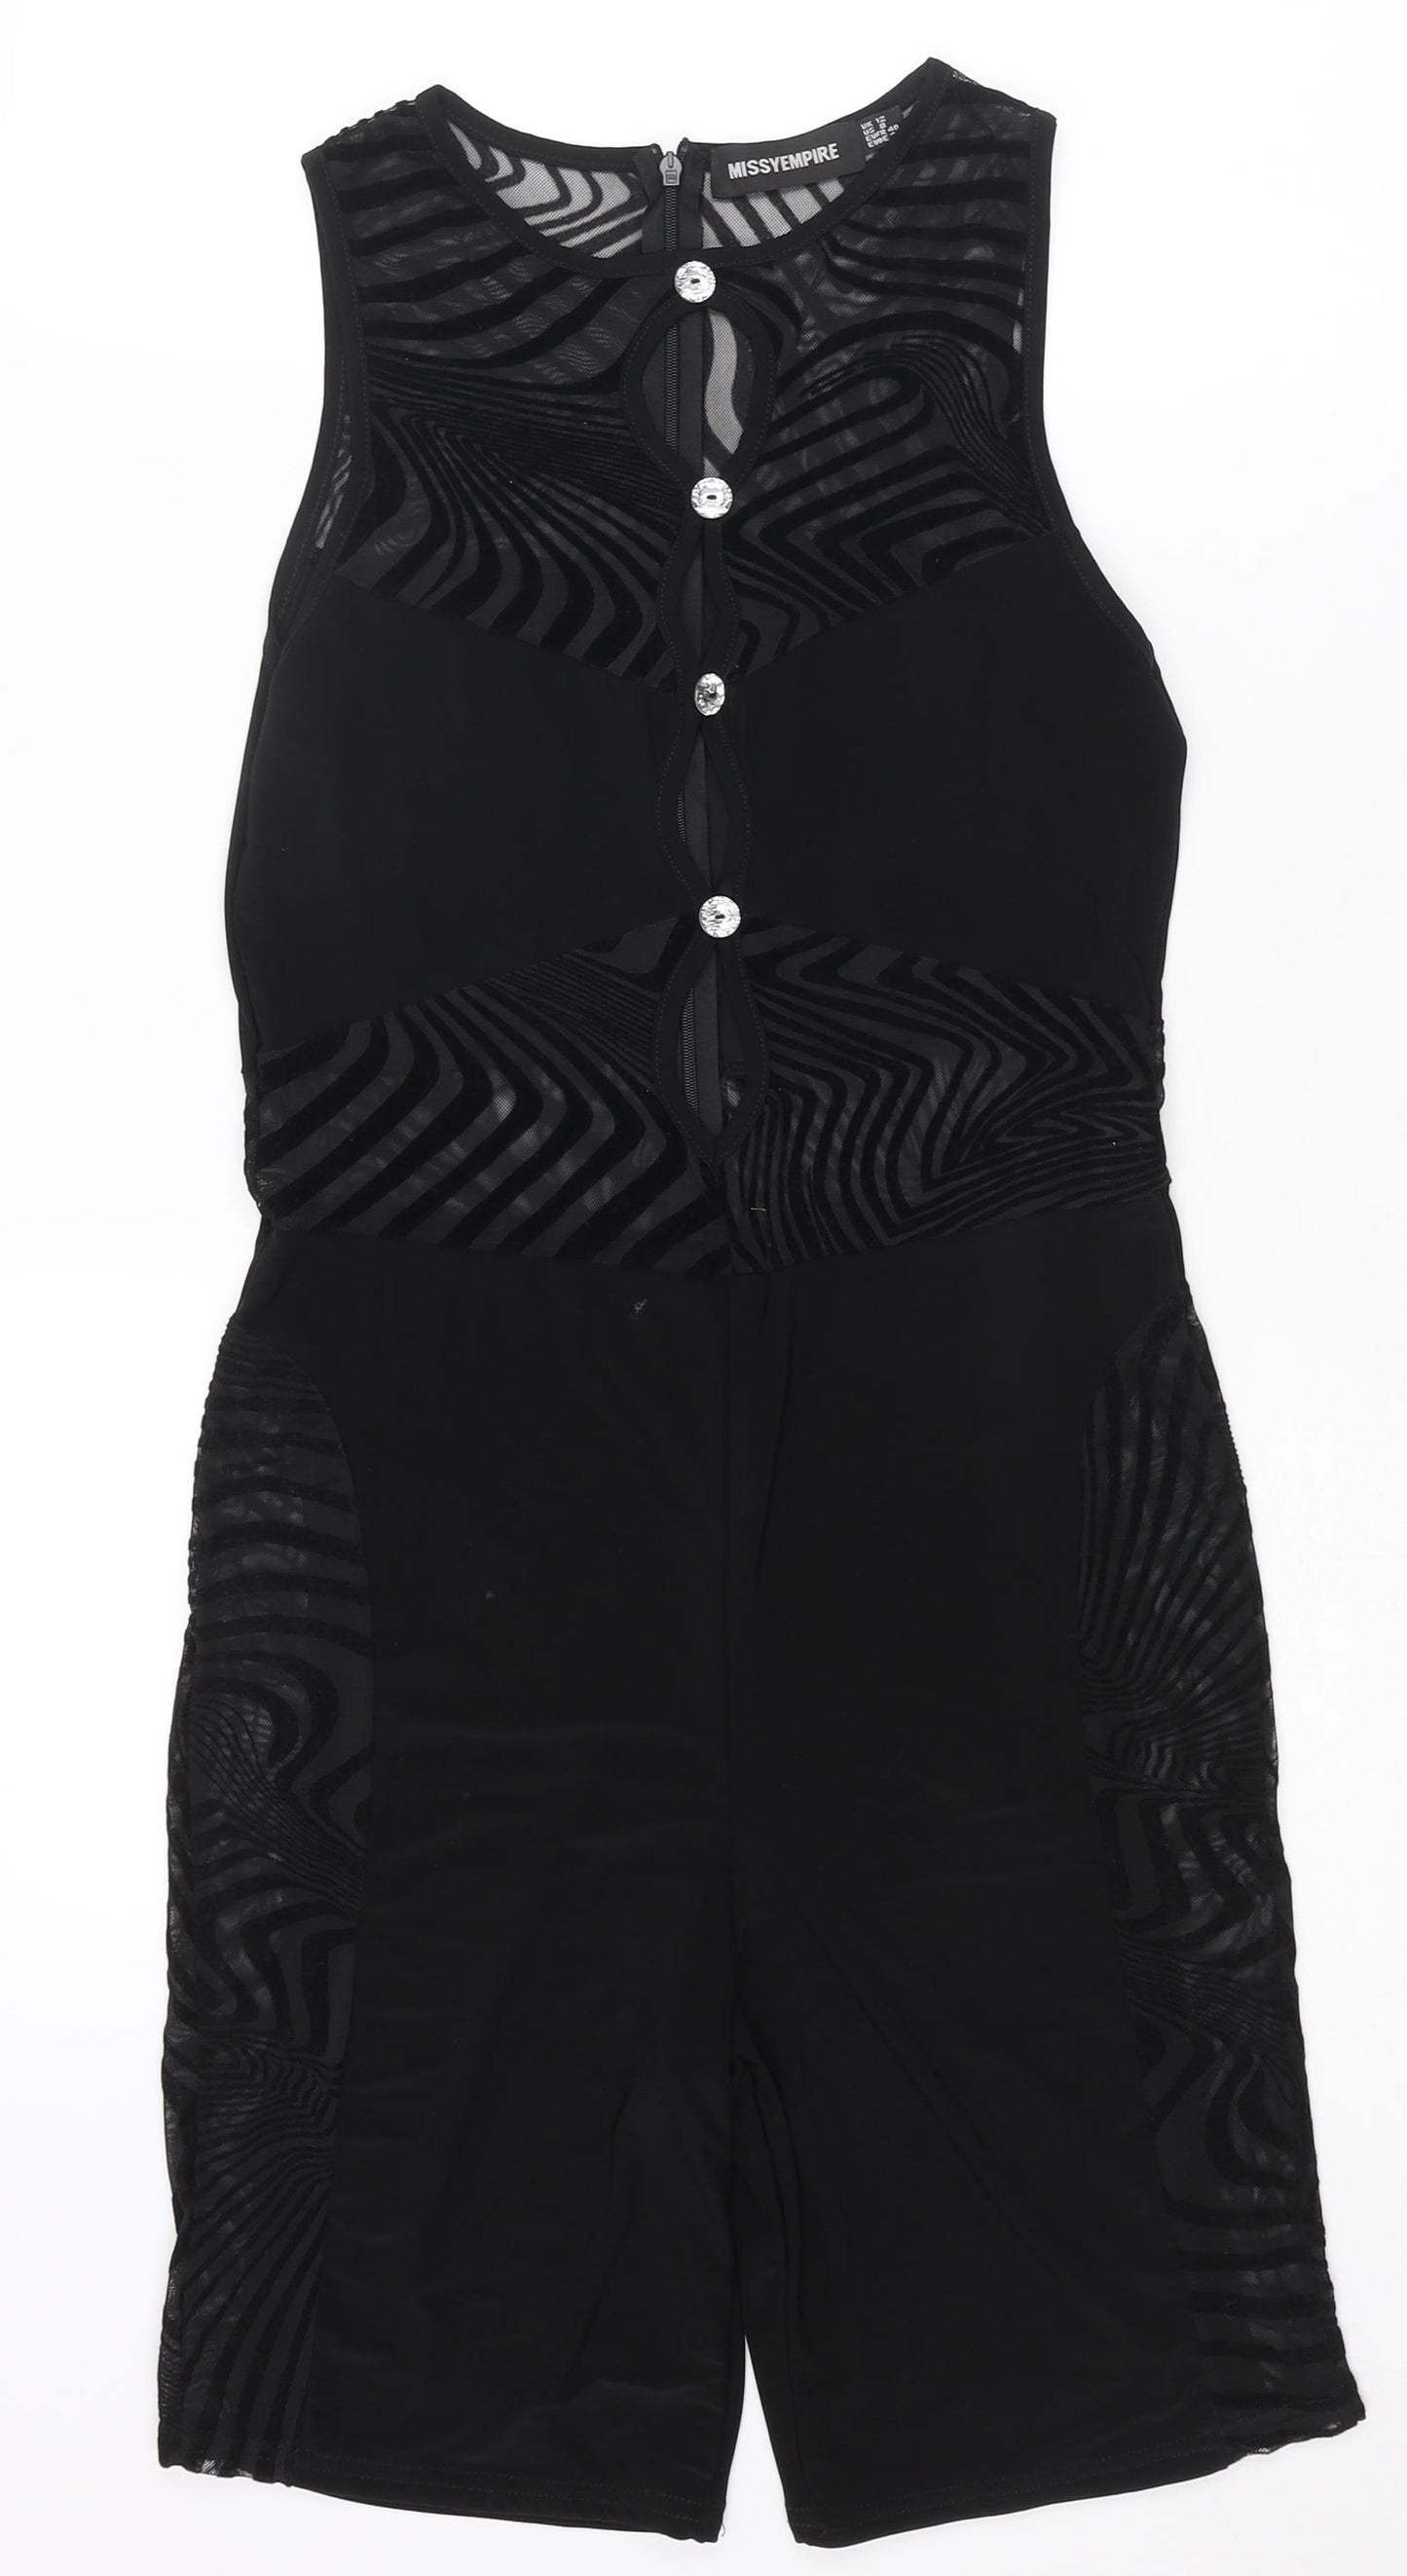 Missy Empire Womens Black Geometric Polyester Playsuit One-Piece Size 12 L7 in Zip